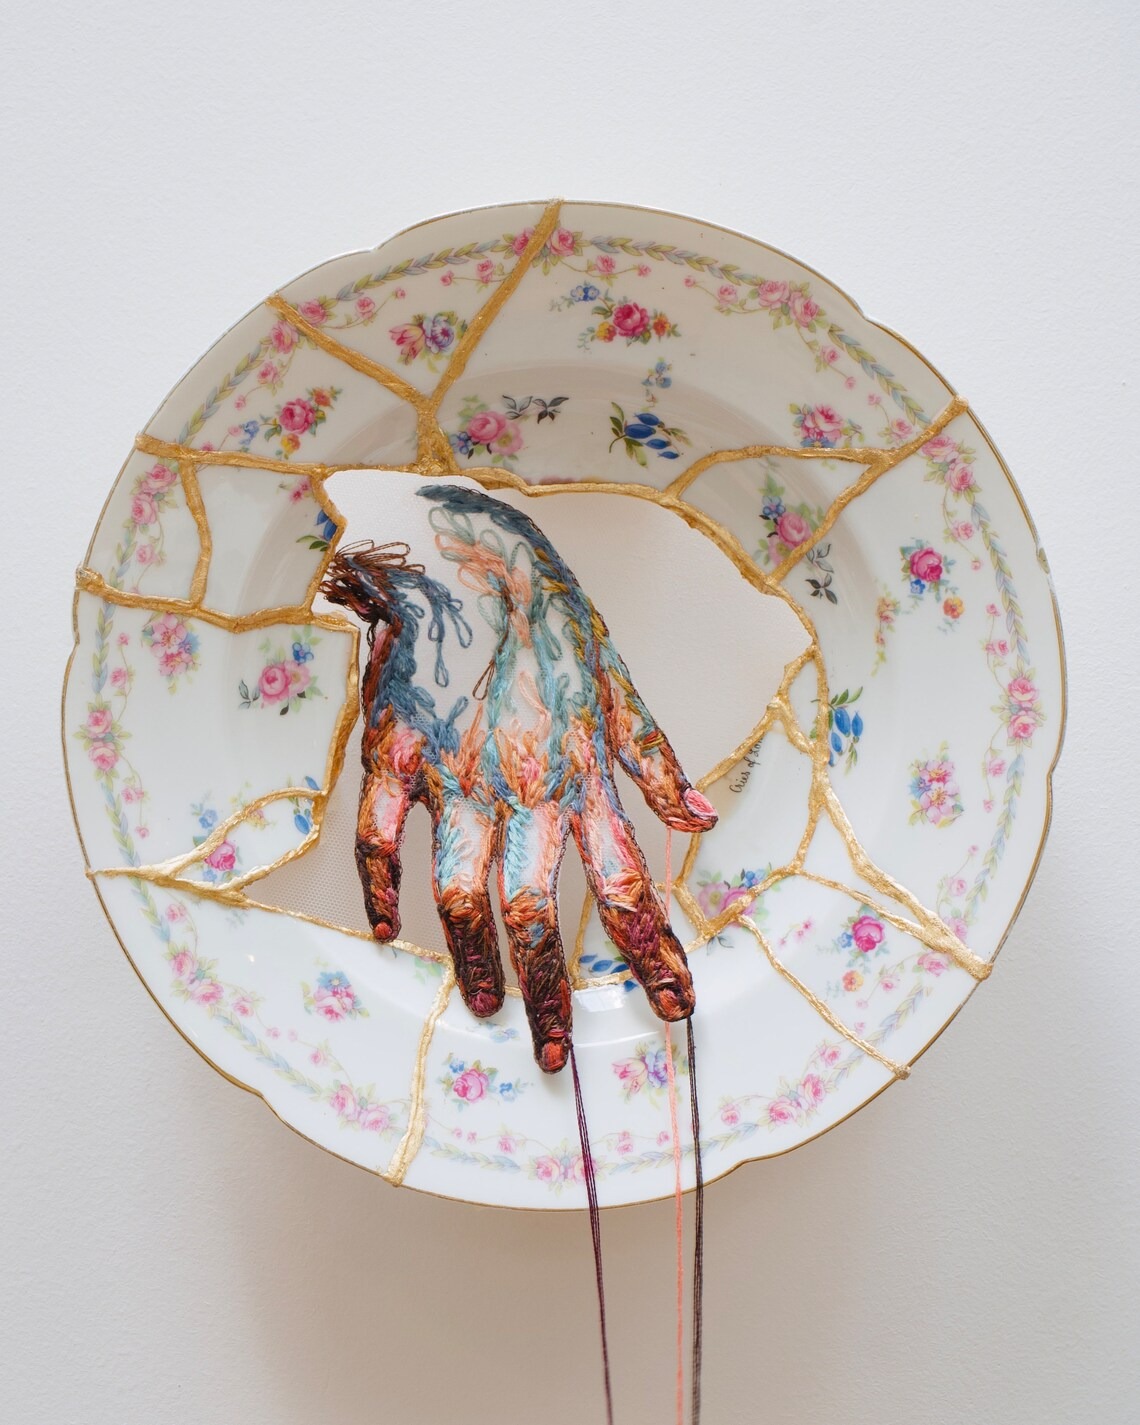 Embroidered Kintsugi, Delicate And Meaningful Mixed Media Artworks By Kathrin Marchenko (5)